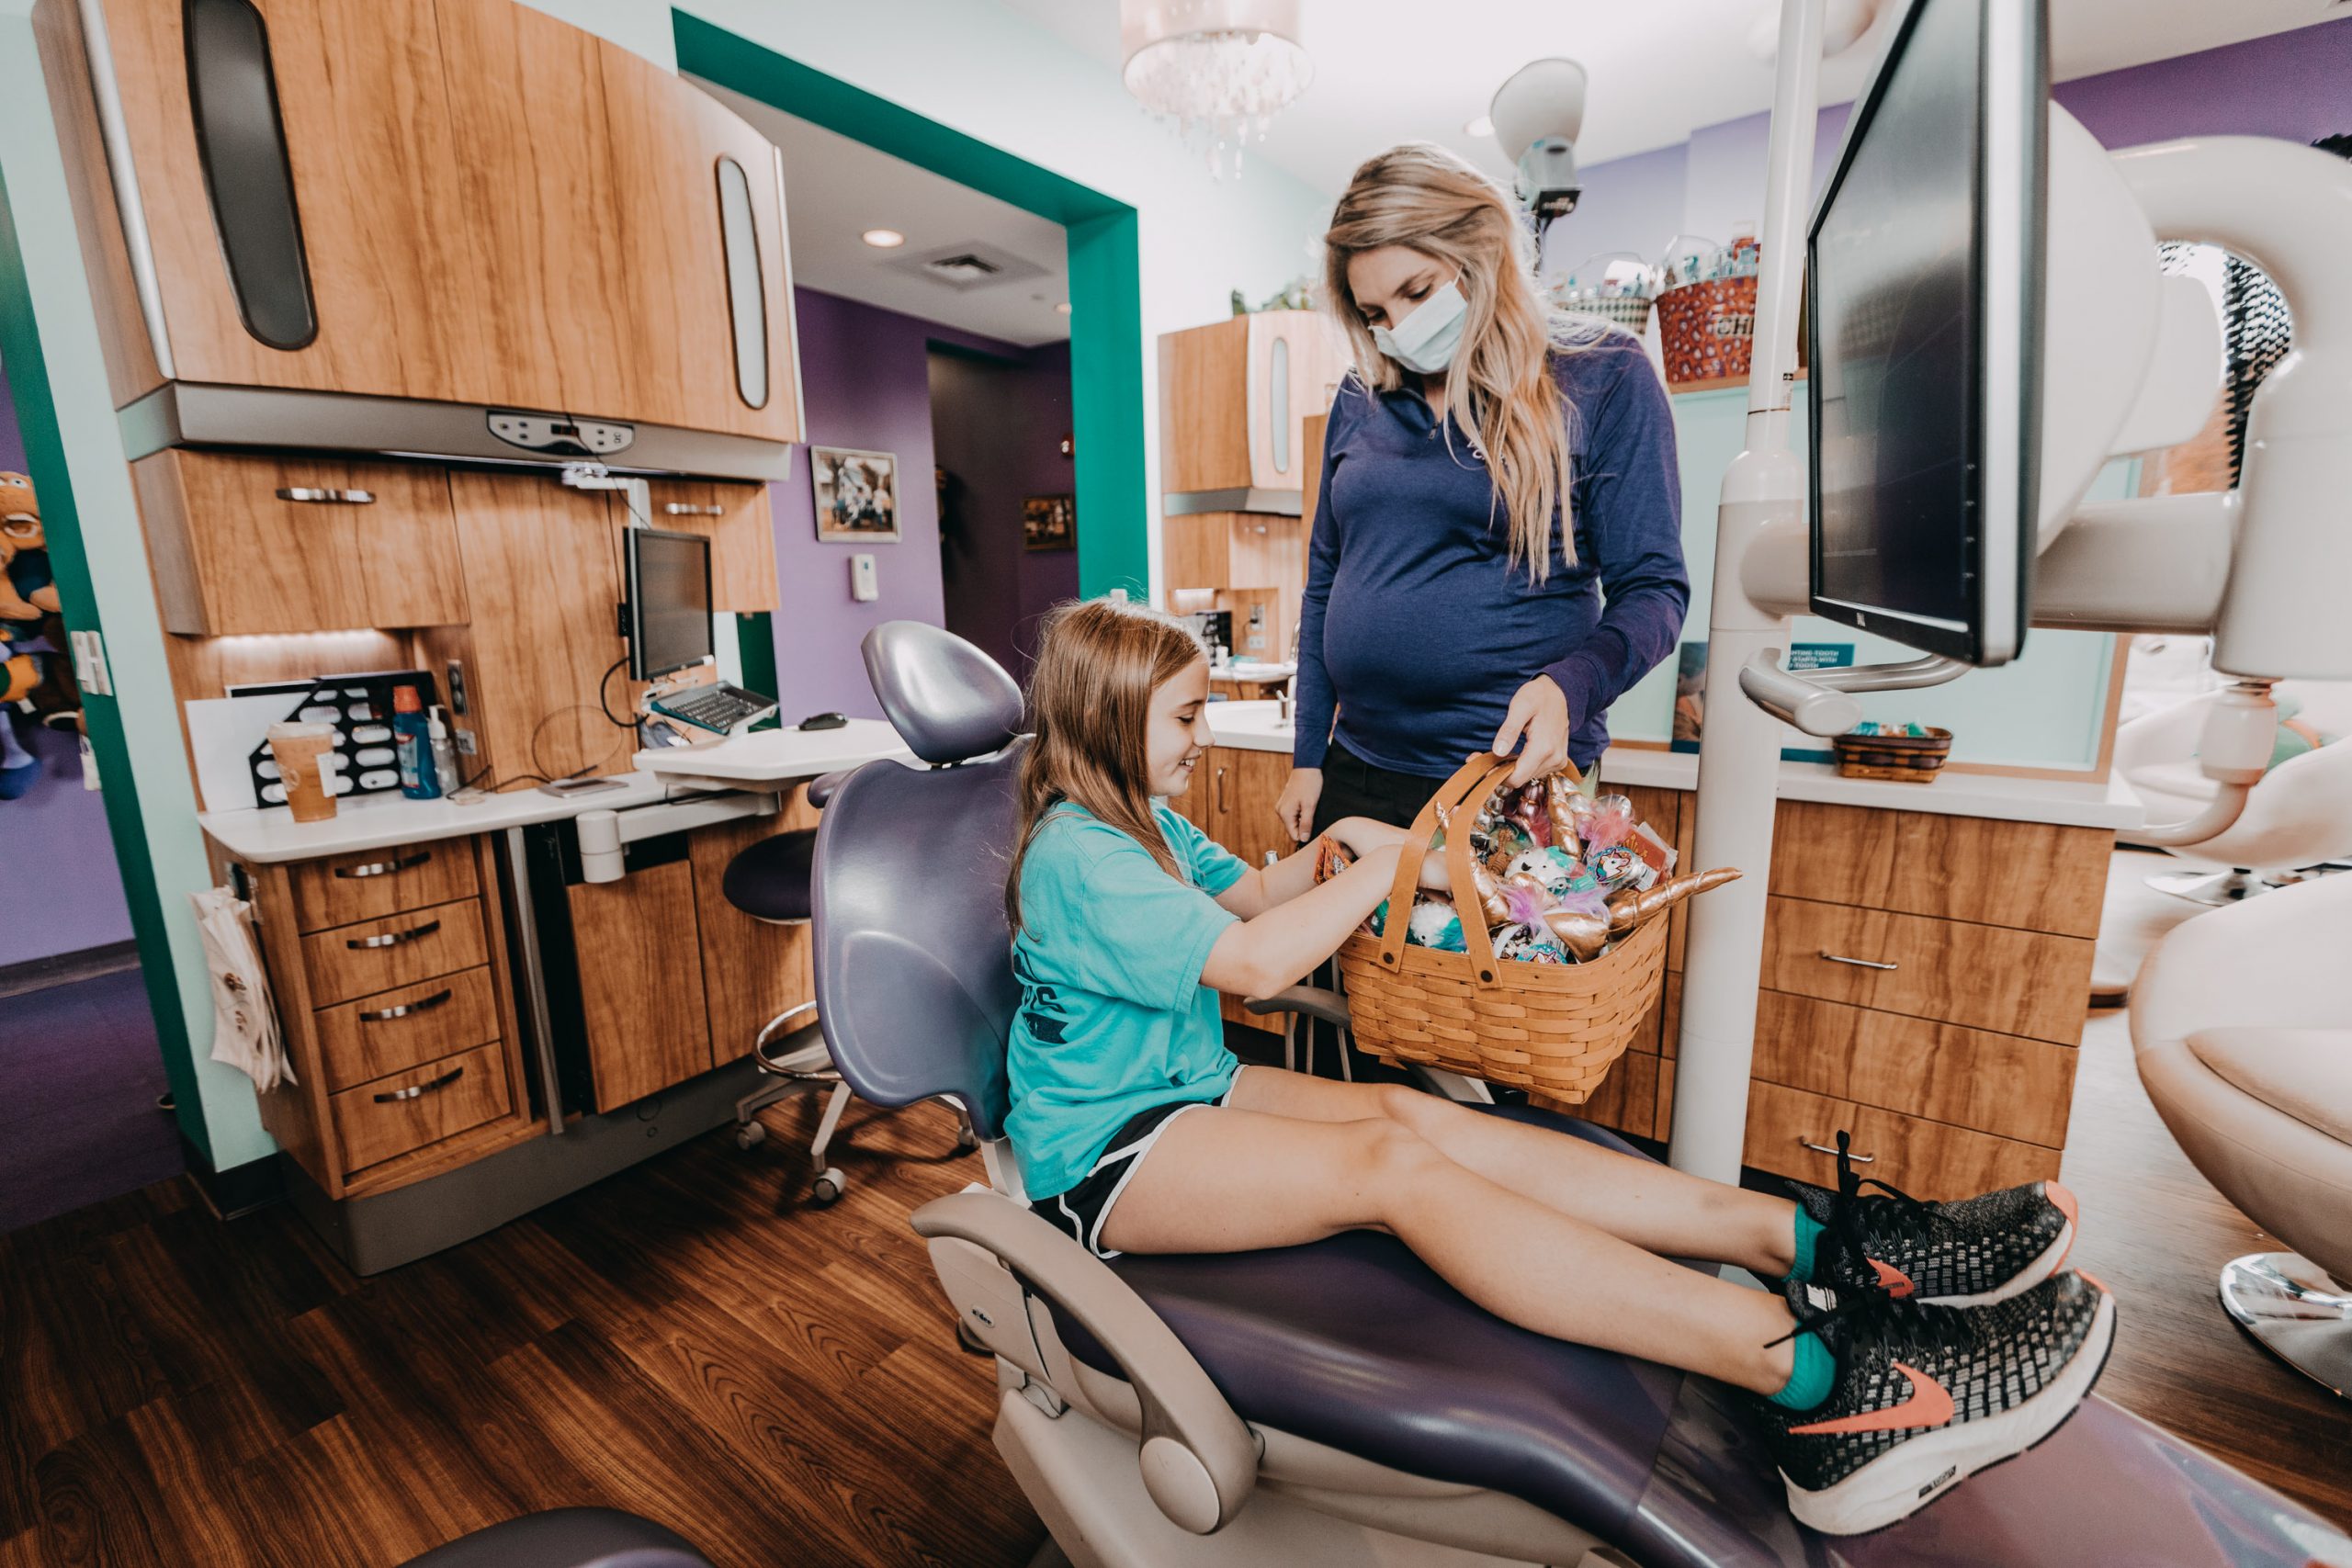 A young girl sitting in a Philadelphia dentist’s chair chooses a prize from an overflowing basket of gifts after her checkup.